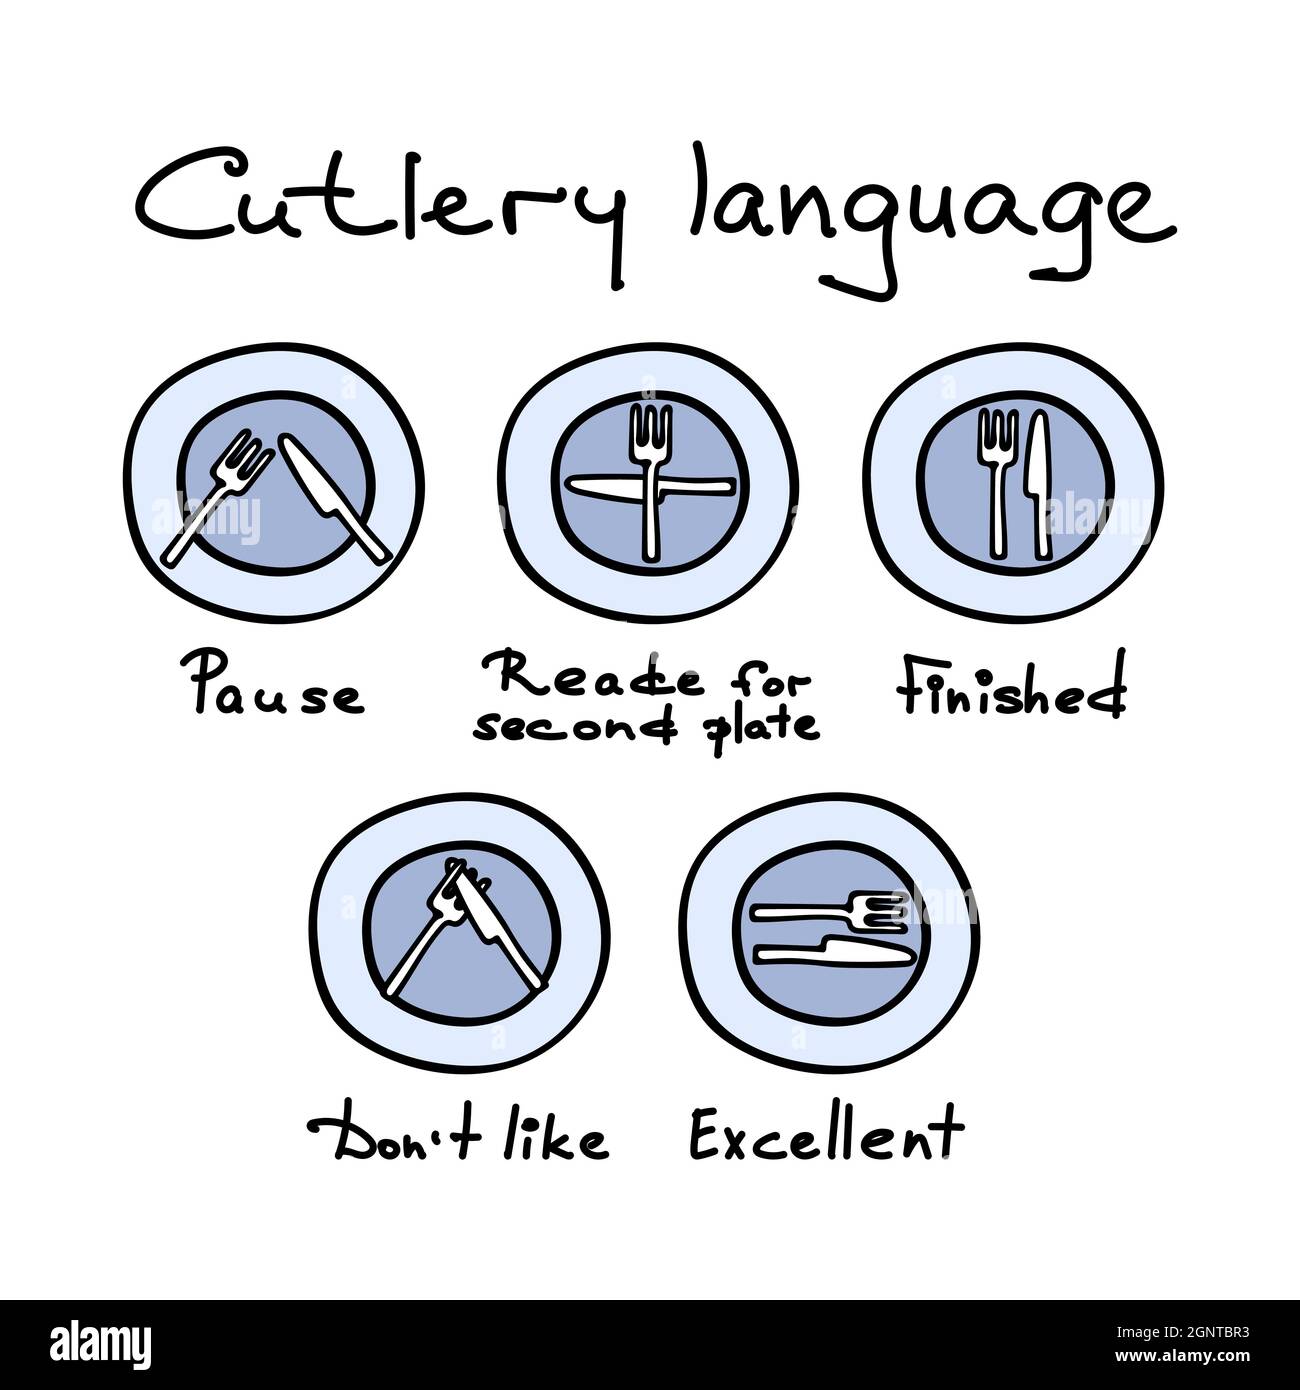 Cutlery language etiquette. Description of the etiquette of cutlery. Lettering. Forks and knife on a plate, signs. Vector illustrations. Stock Vector